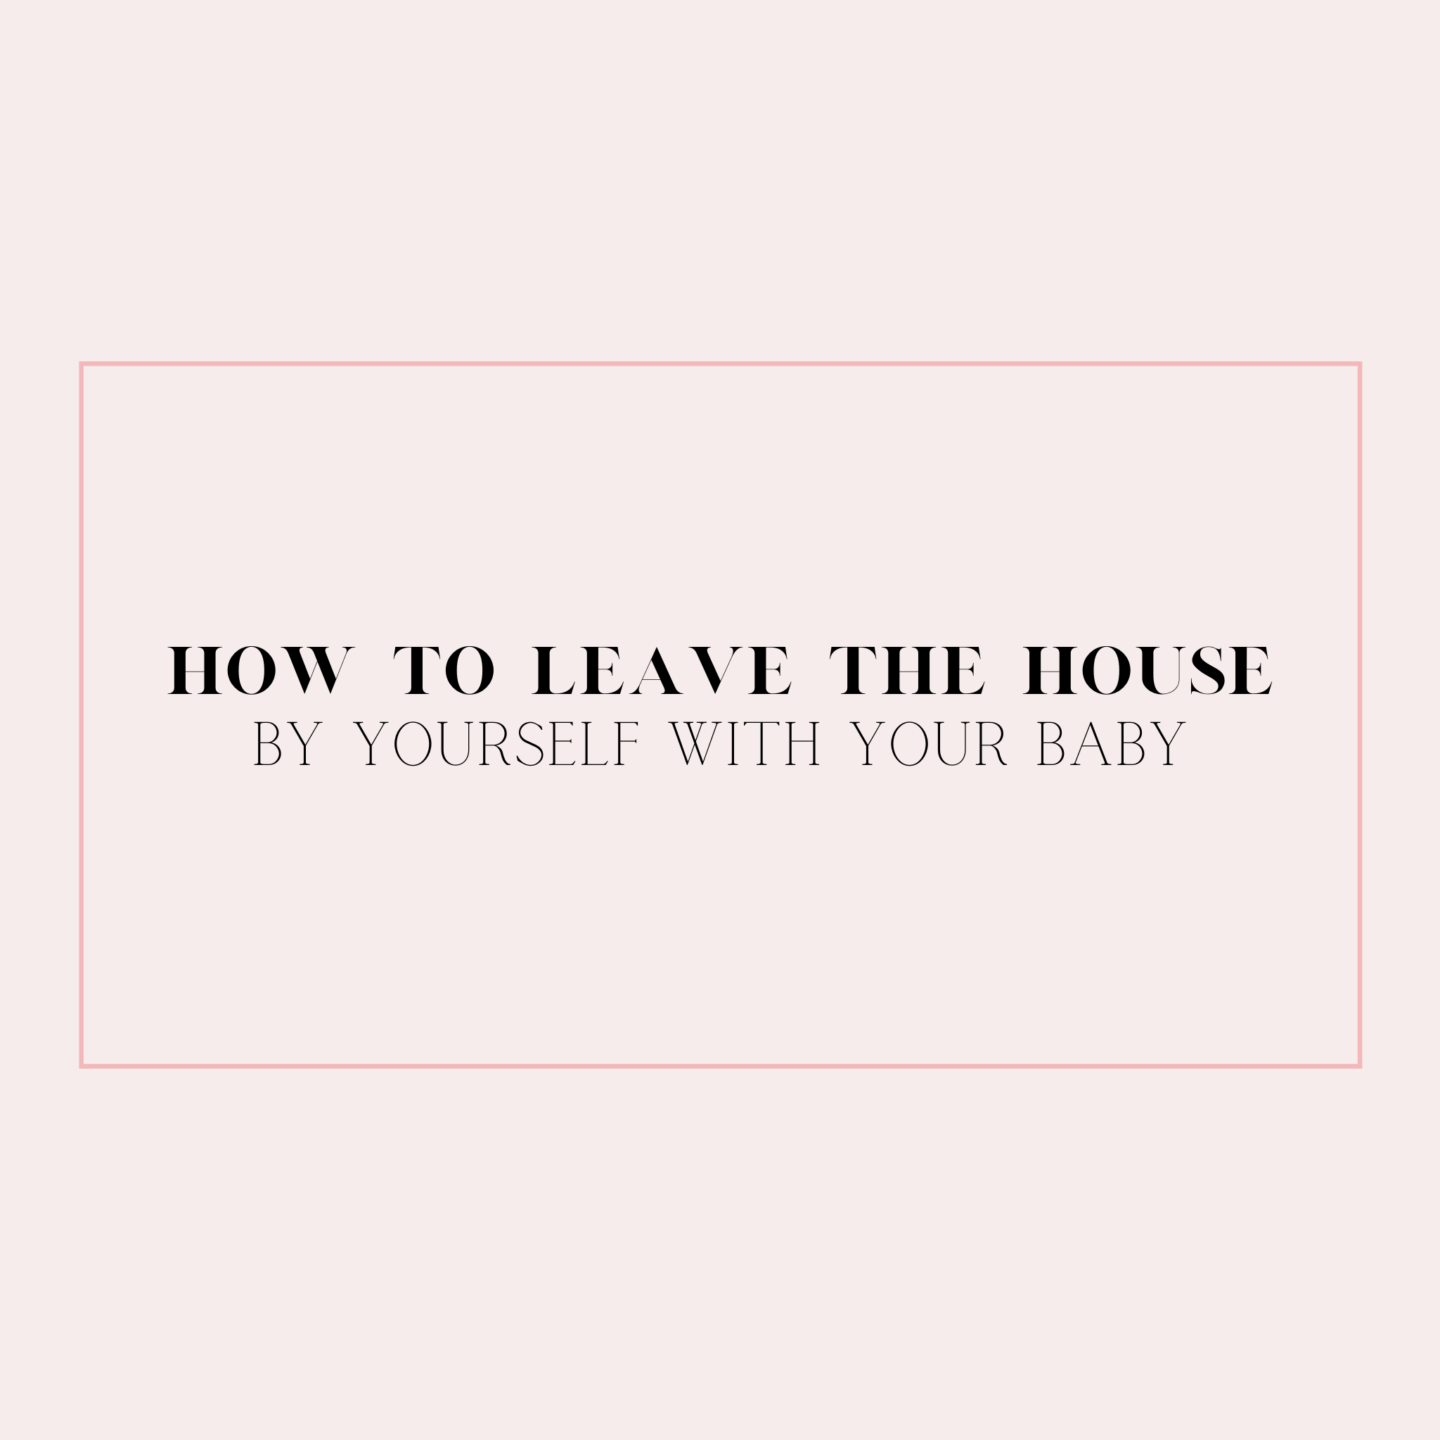 How to Leave the House With Baby On Your Own